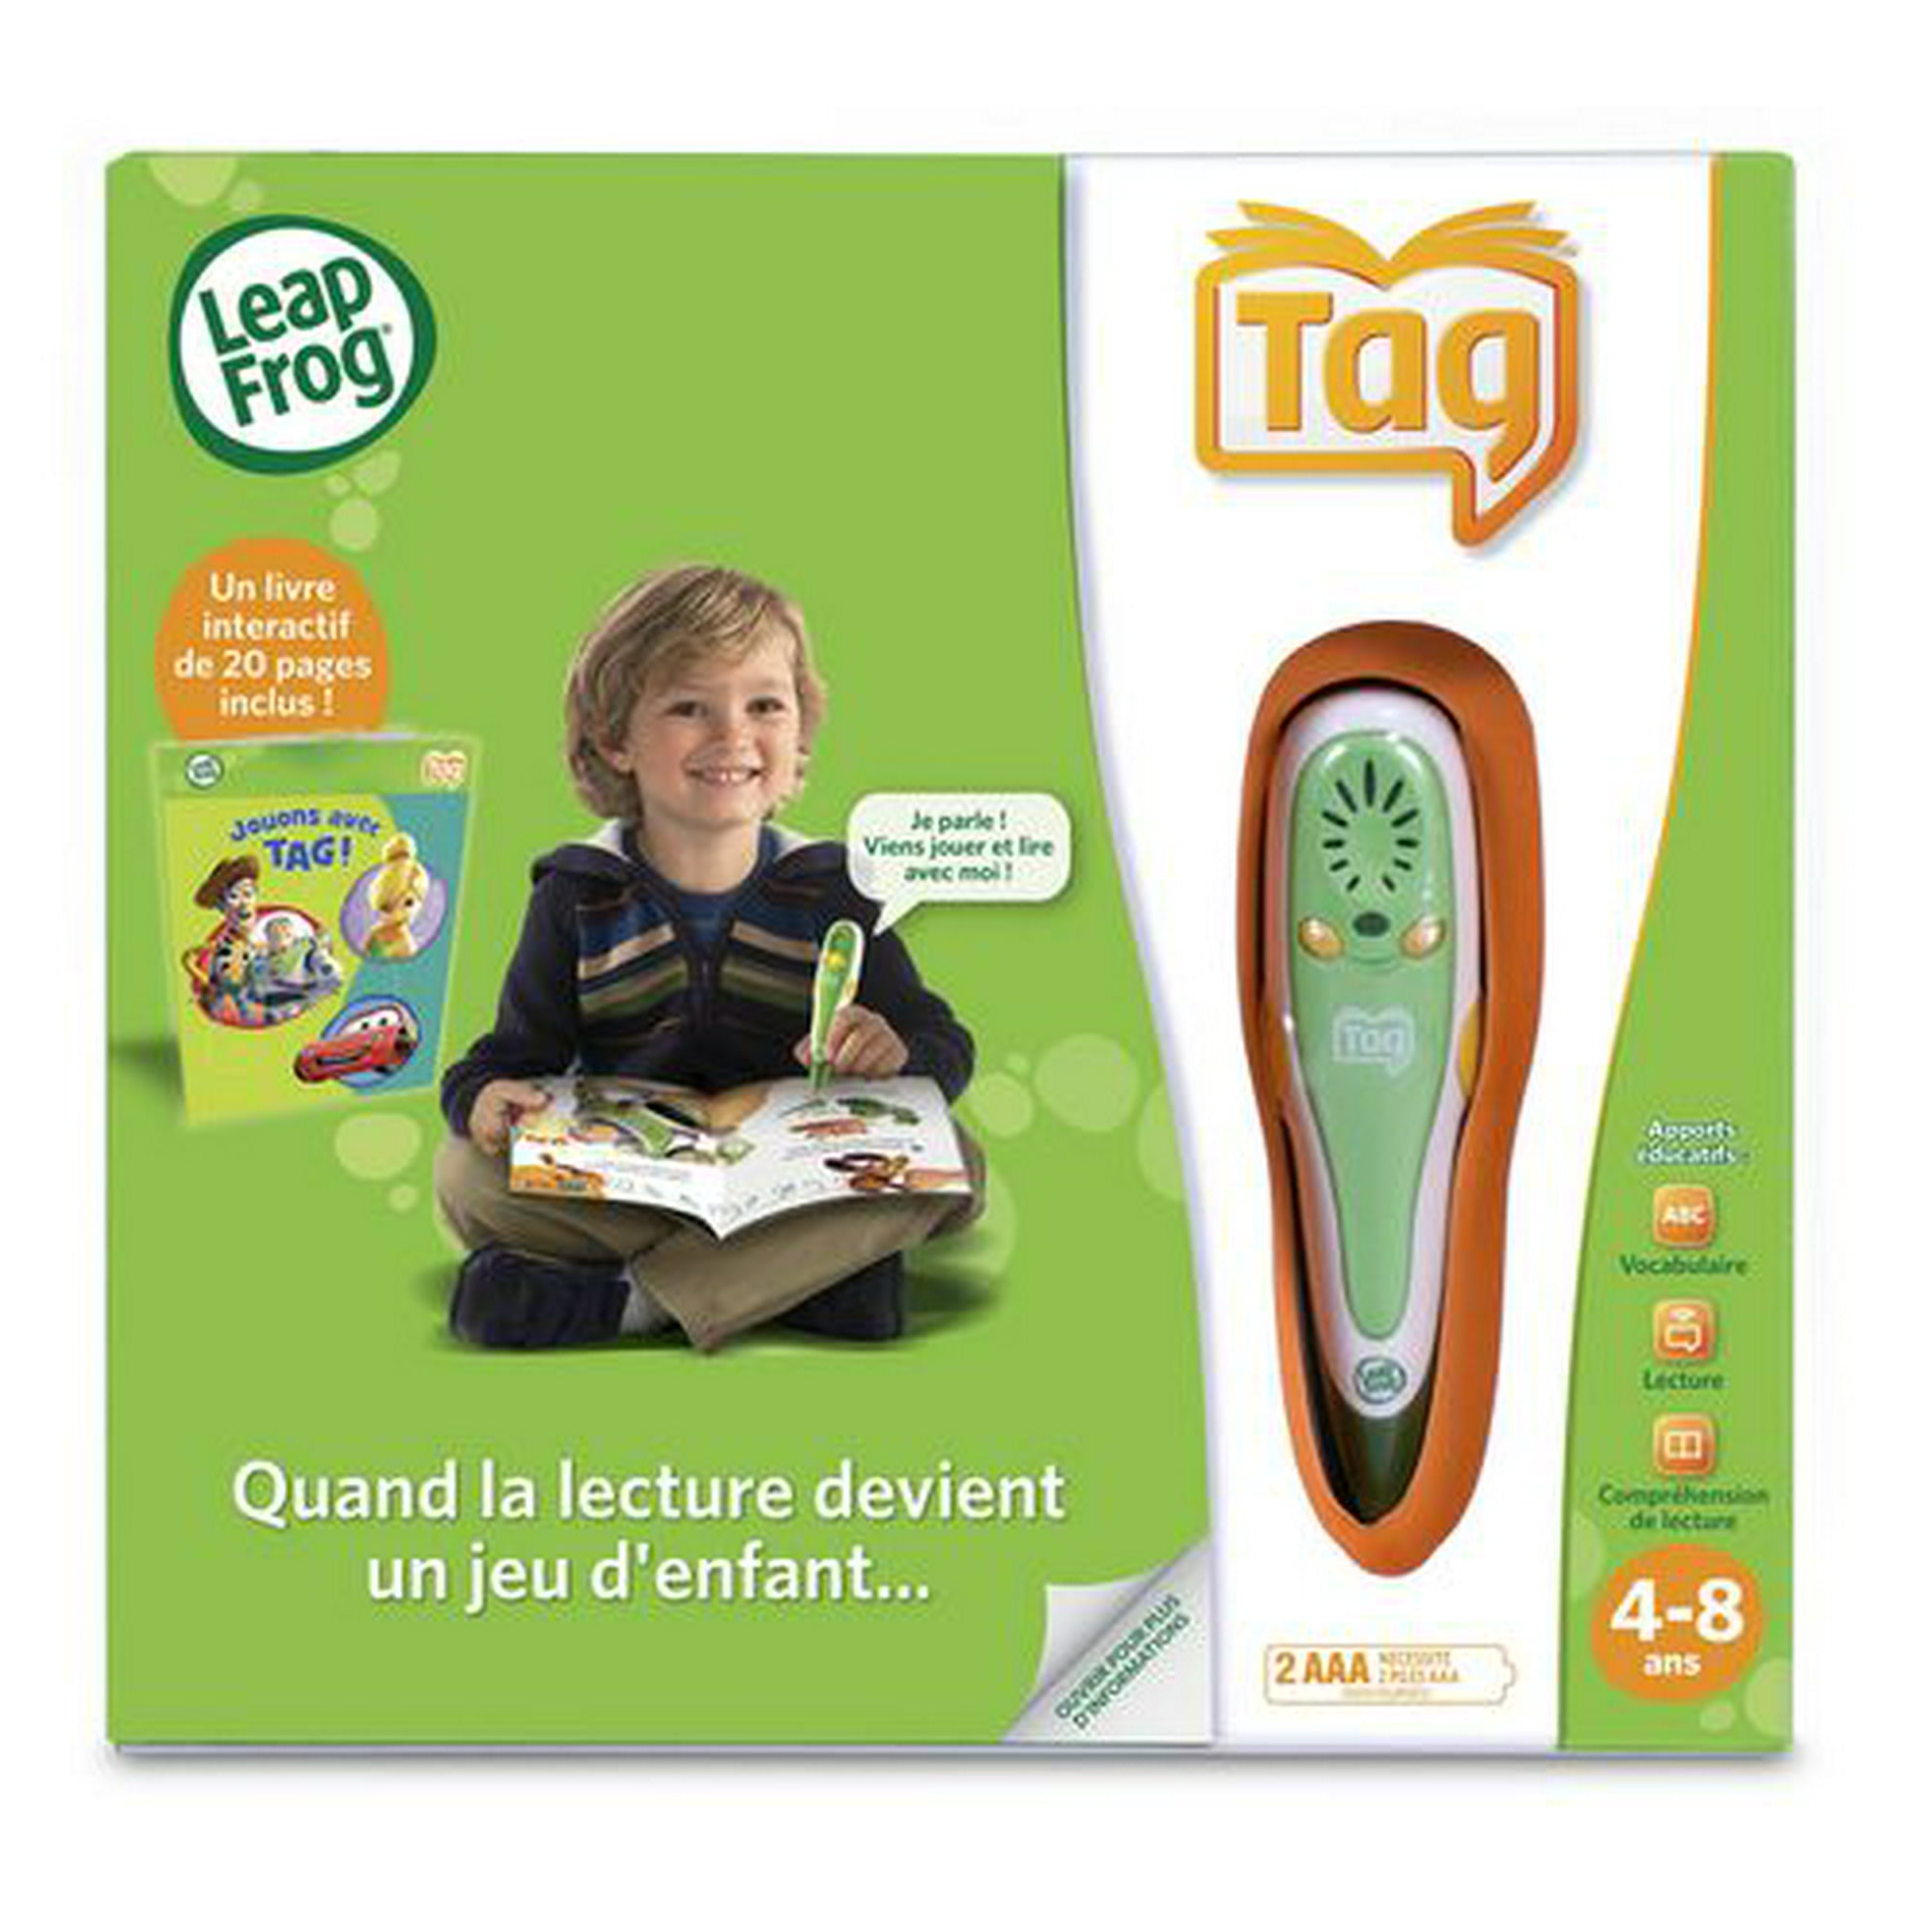 LeapFrog Tag™ Reading System 32Mb - Green French Version 